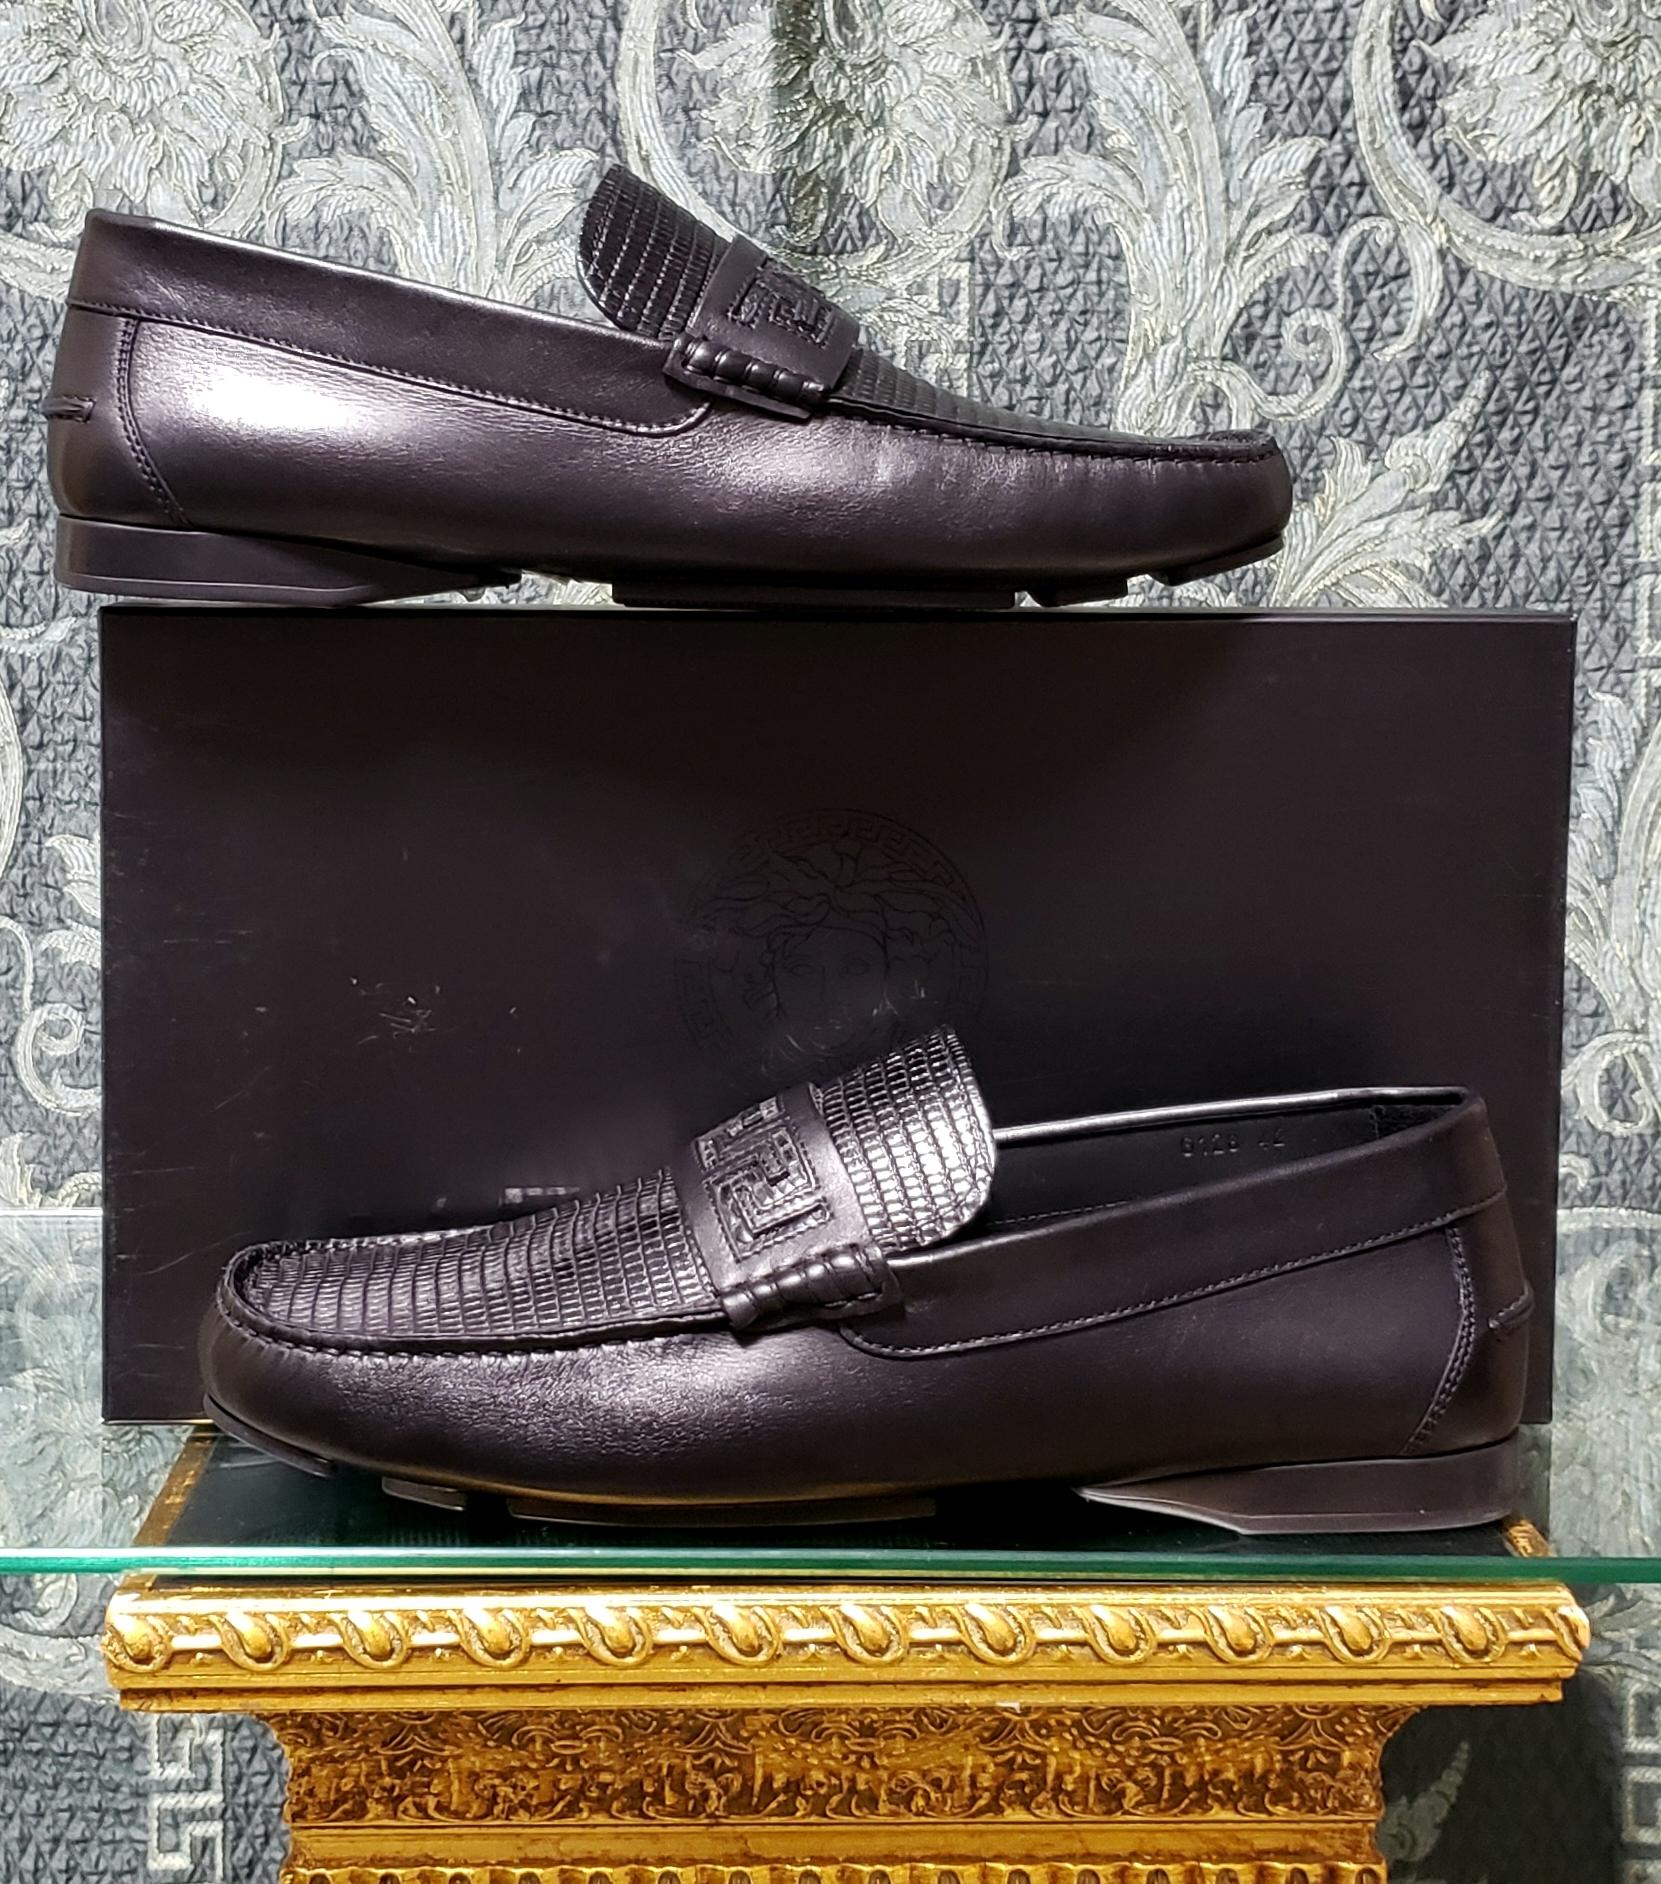 VERSACE

City Shoe

Both casual and chic, these loafers are a great alternative to sneakers when off-duty.
      
Rubber sole loafers

Signature GREEK Pattern

Lining: 100% leather

Made in Italy

Italian Size is 42 - US 9 insole: 10 1/2